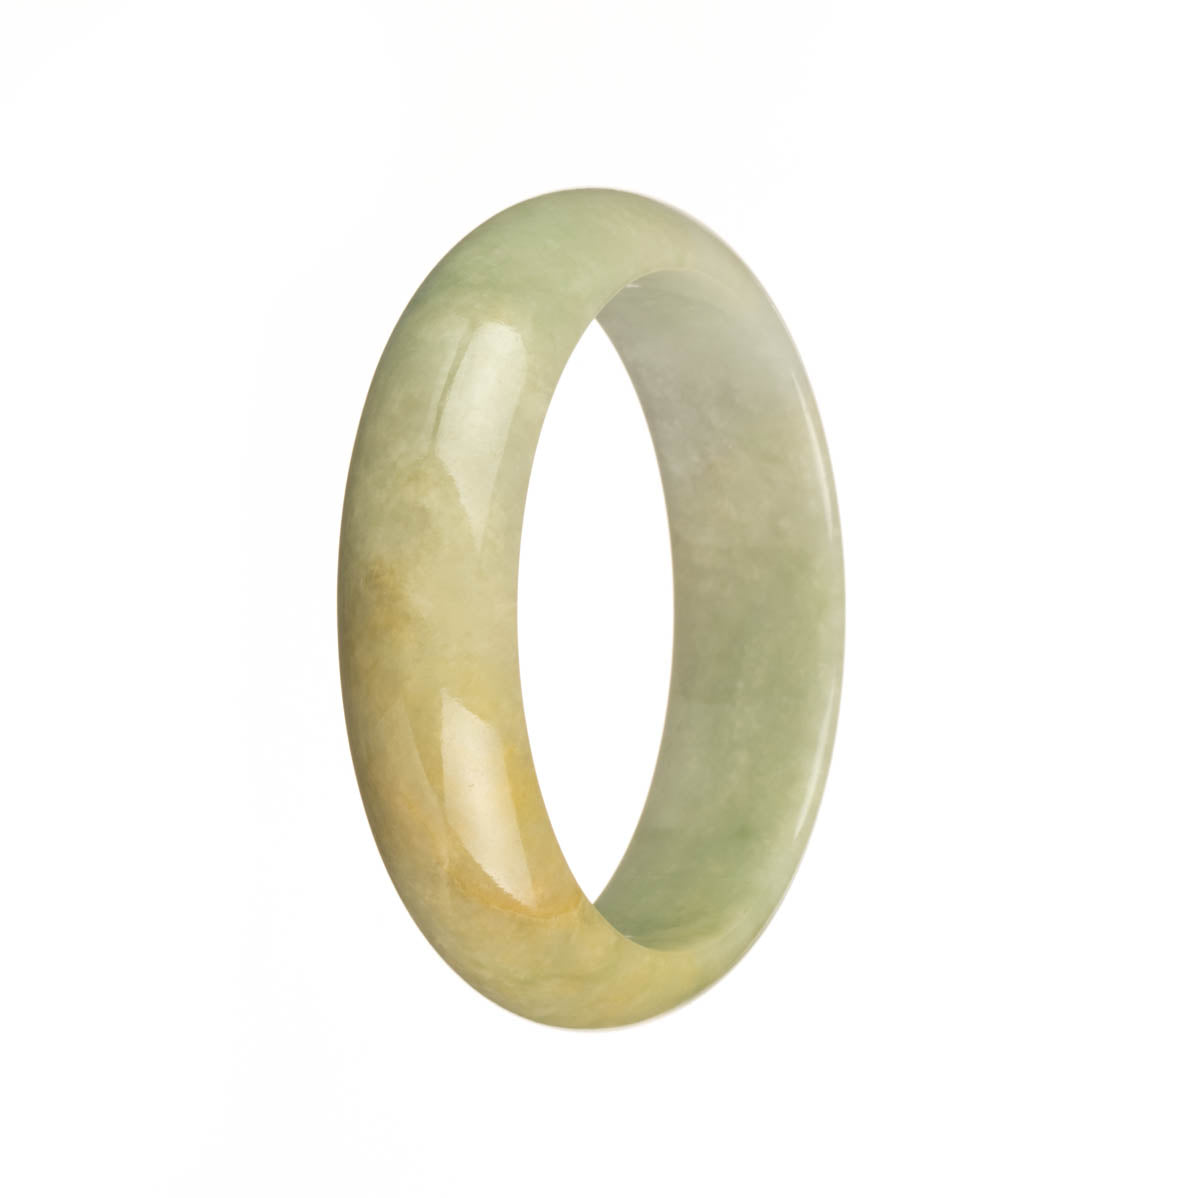 Genuine Grade A Brown, Pale Green and White Traditional Jade Bracelet - 53mm Half Moon